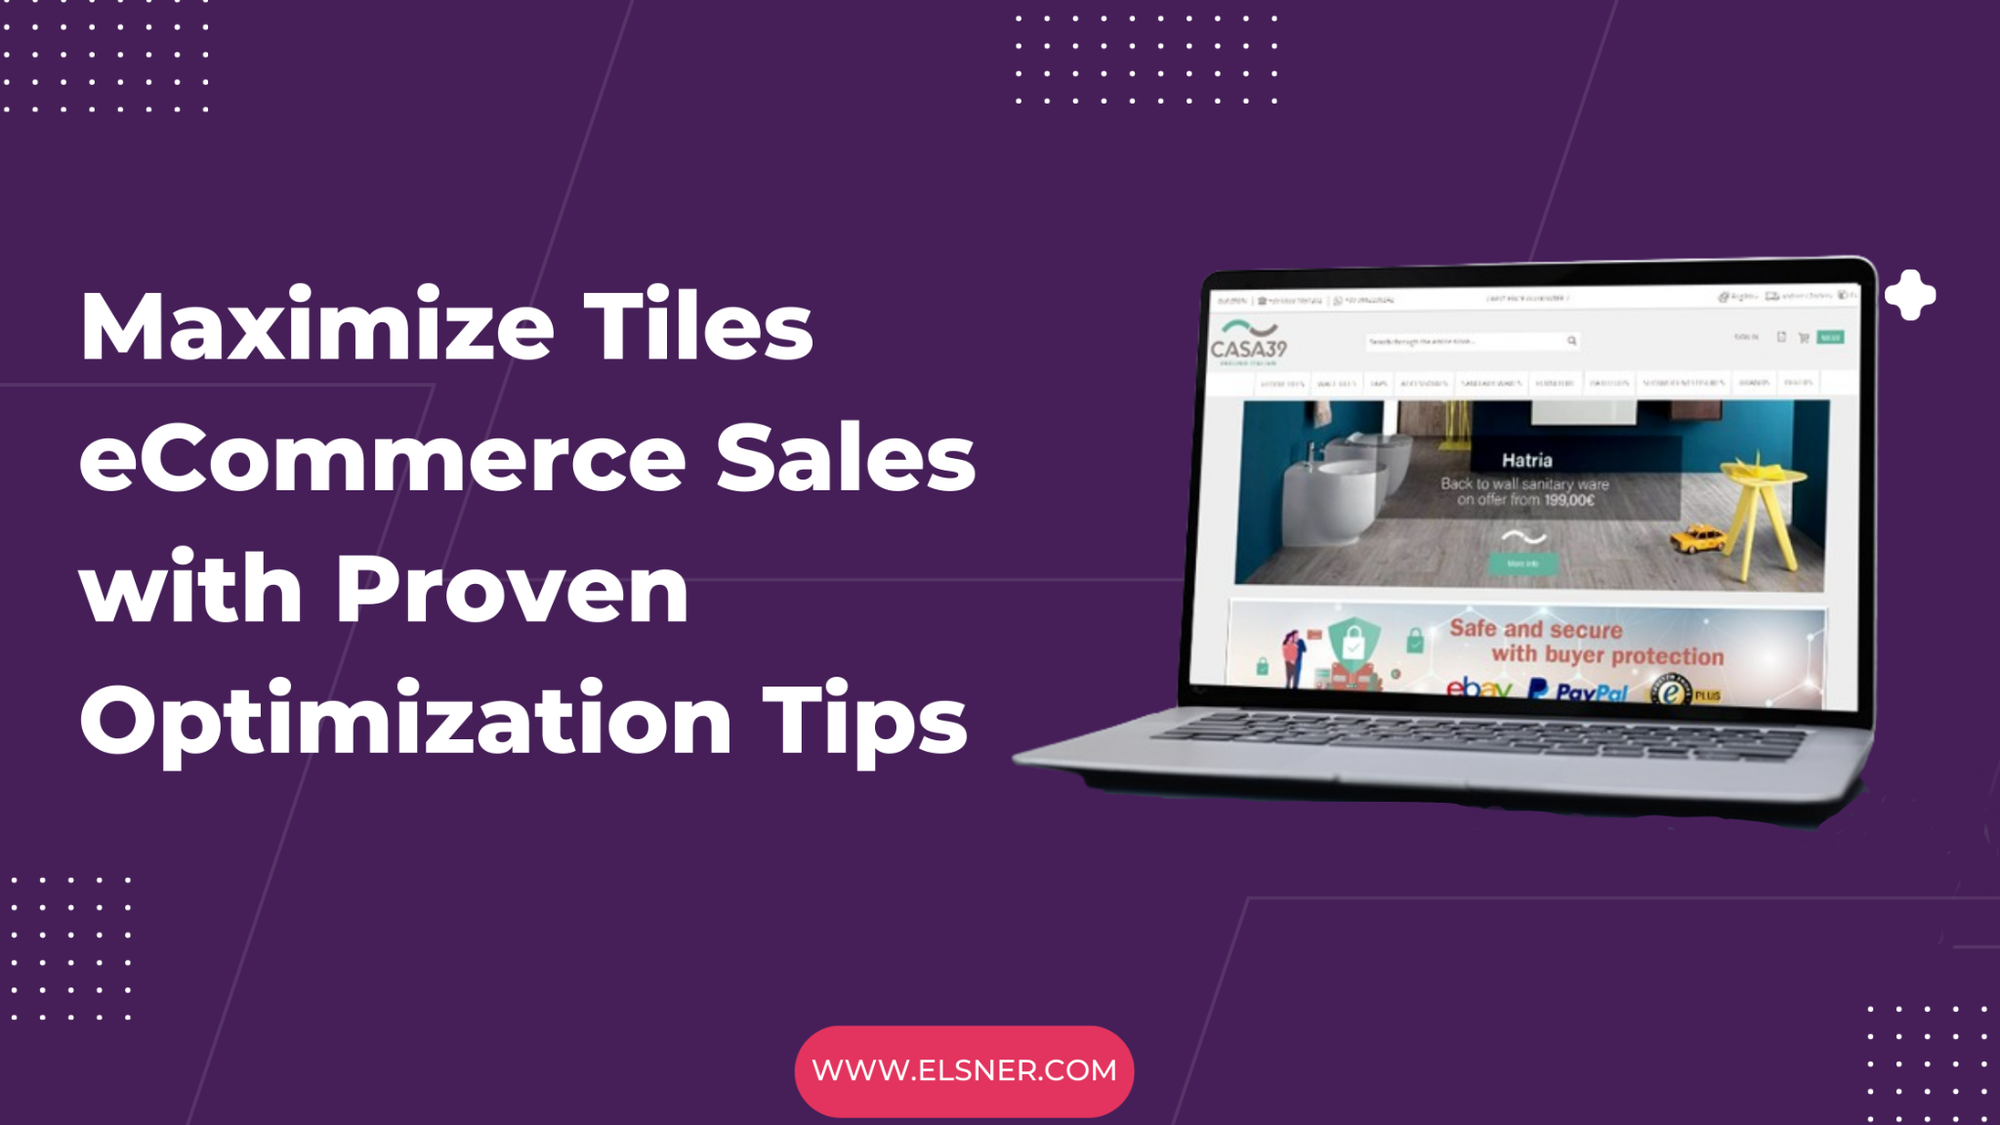 Transform Your Tiles E-commerce Store: Expert Tips for Optimization and Maximizing Sales